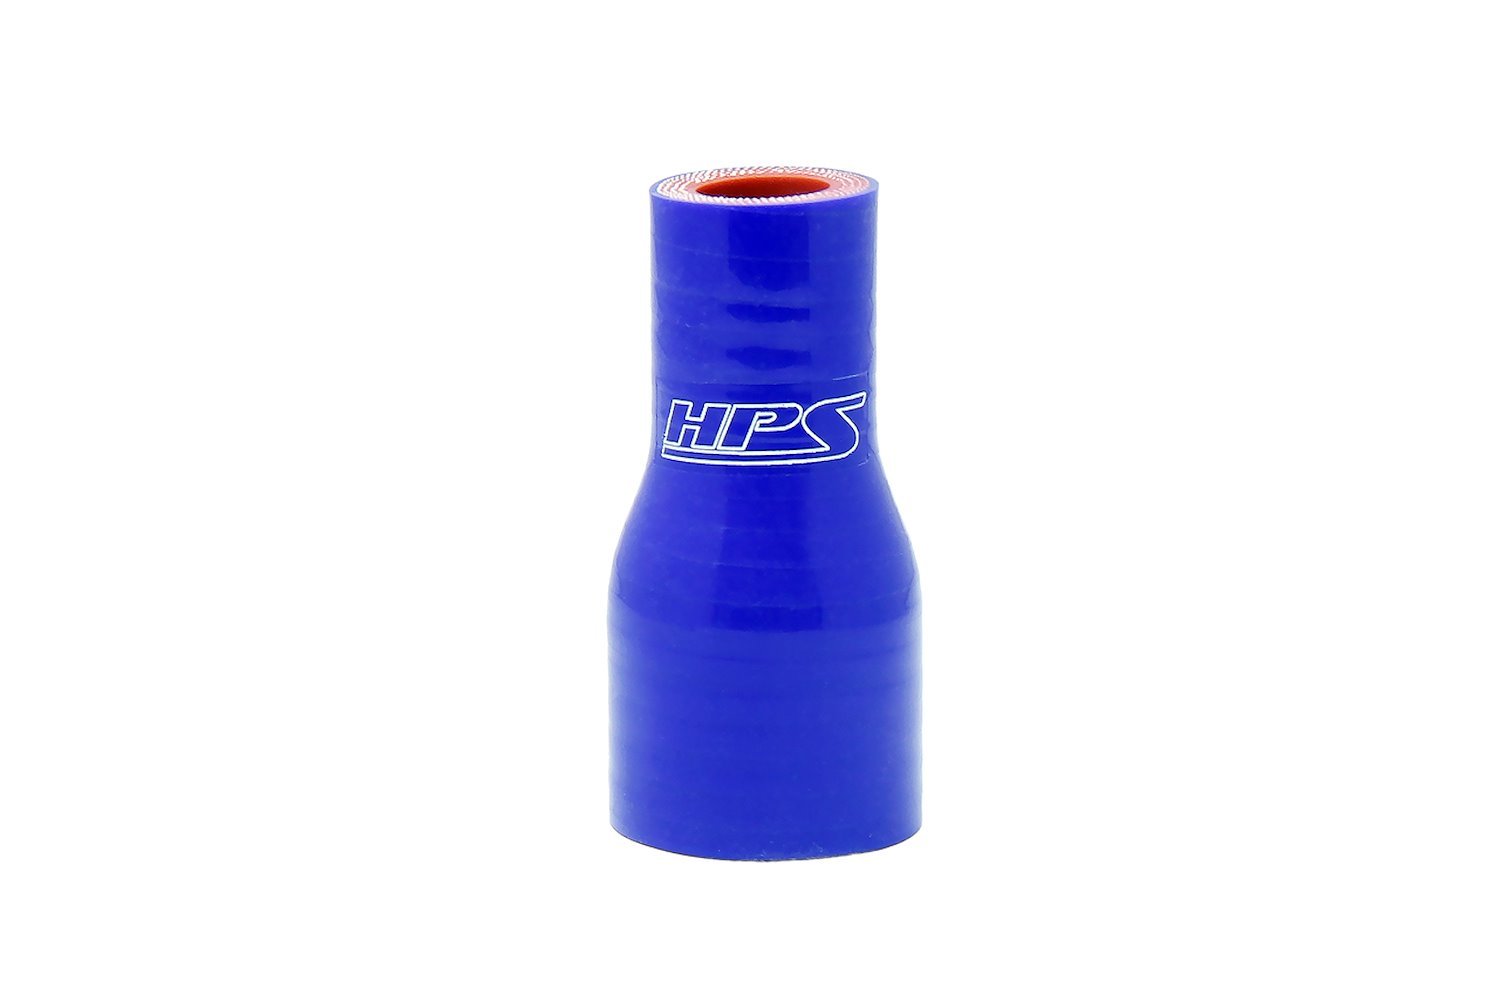 HTSR-125-150-L4-BLUE Silicone Reducer Hose, High-Temp 4-Ply Reinforced, 1-1/4 in. - 1-1/2 in. ID, 4 in. Long, Blue